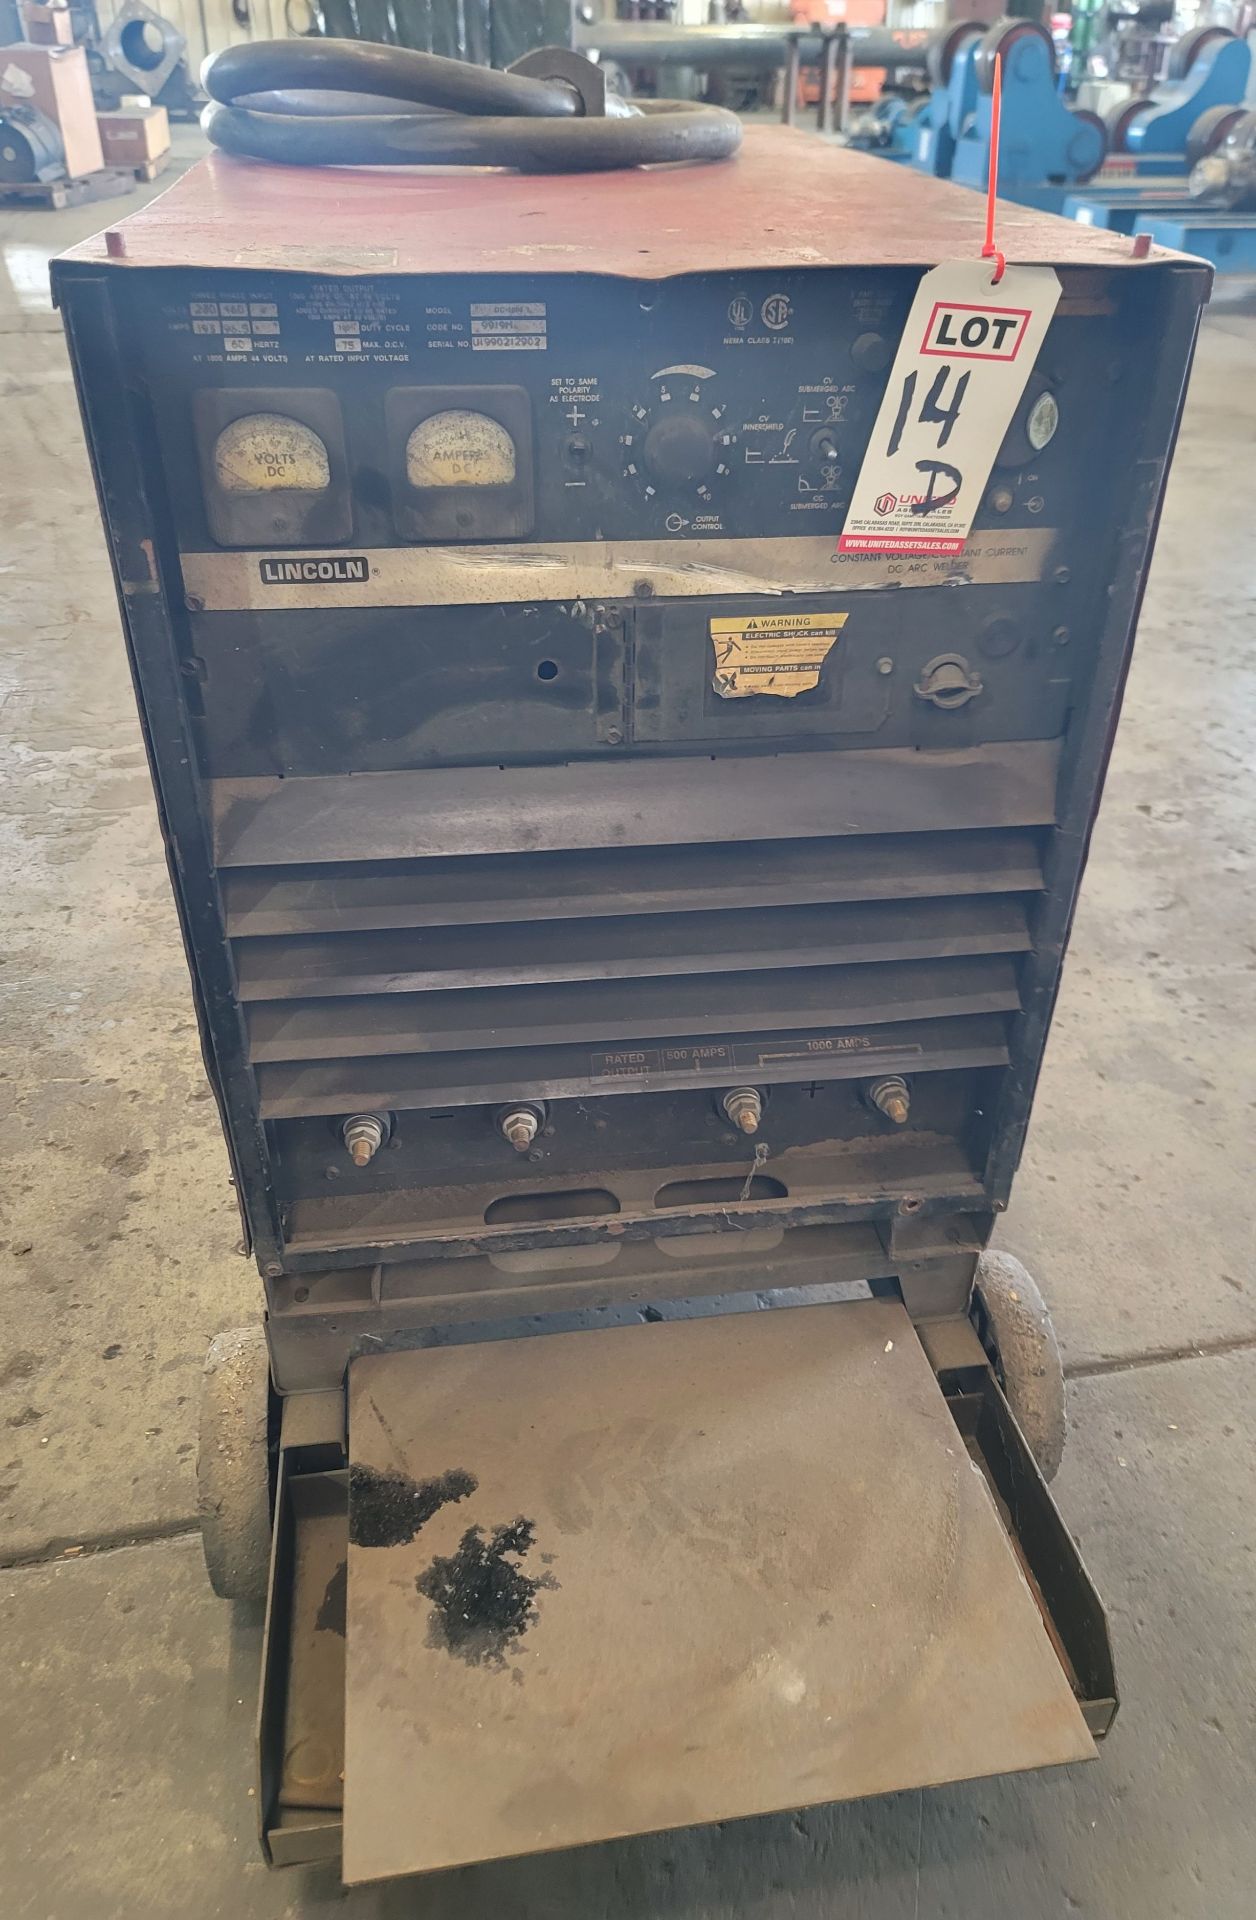 LINCOLN ELECTRIC DC-1000 MULTI-PROCESS WELDING POWER SOURCE, CODE: 9919M, S/N U1990212902 - Image 3 of 3